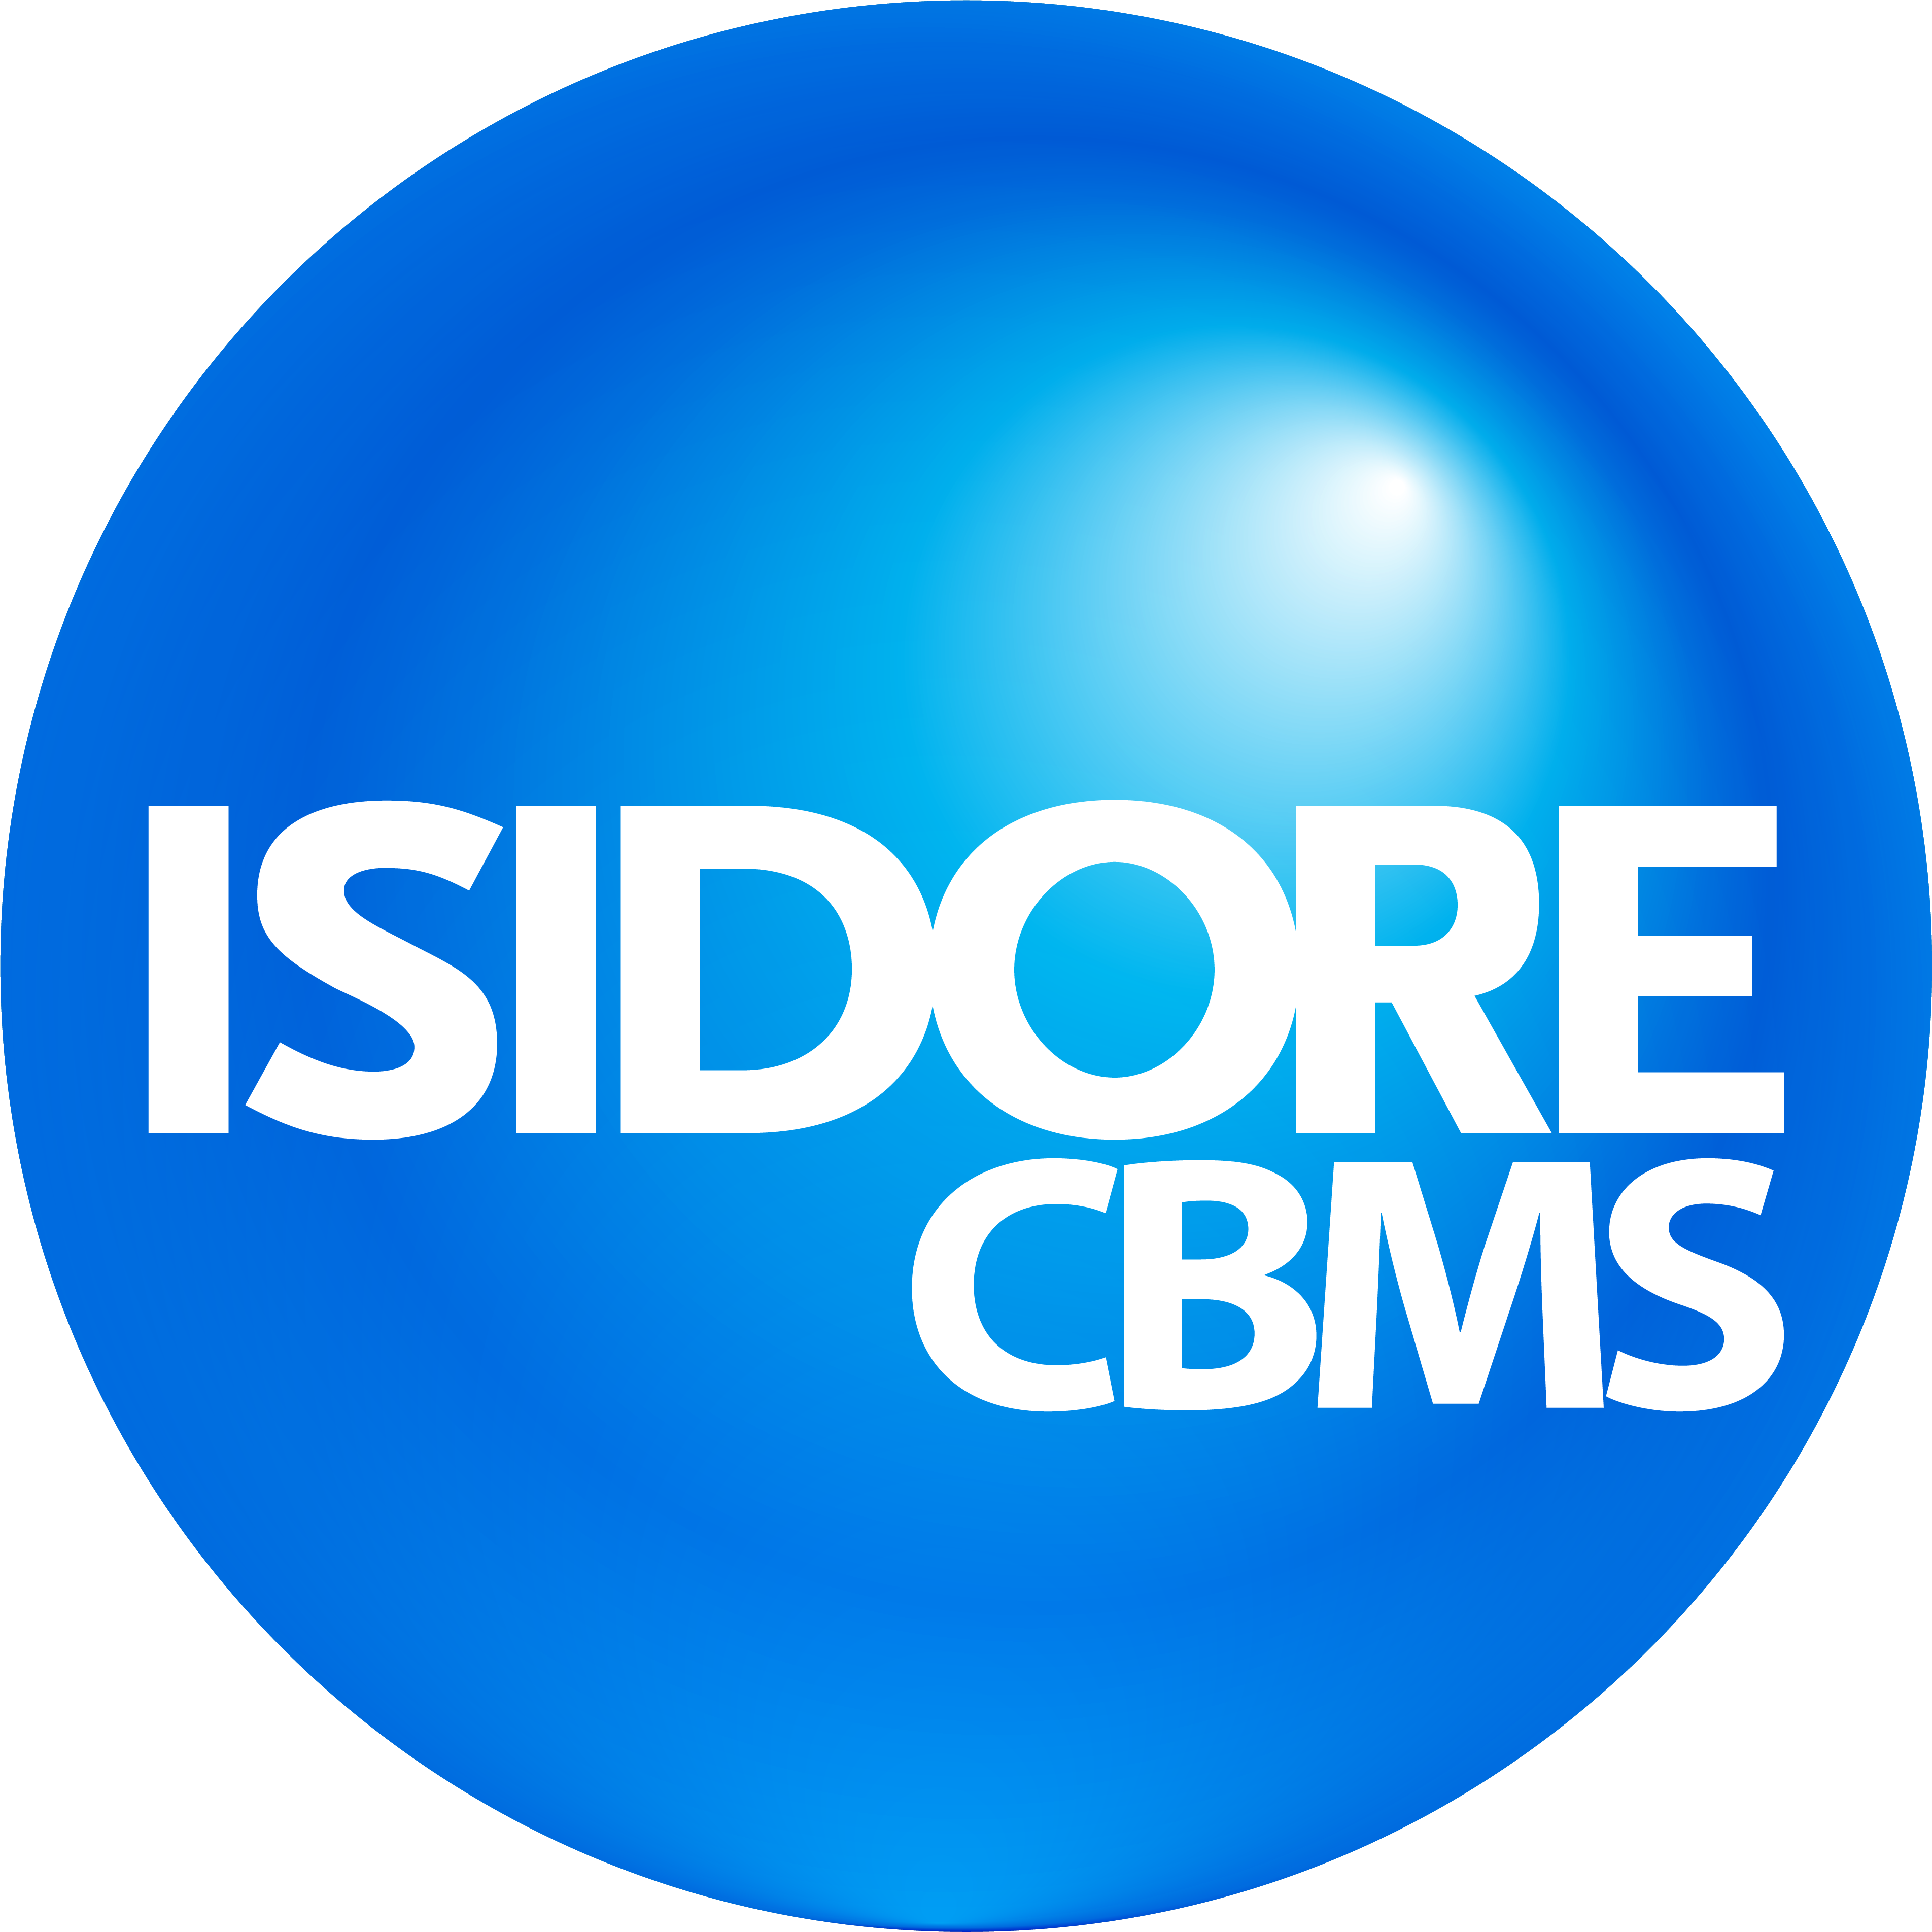 Isidore CBMS (CEntralised Budgeting Management System)